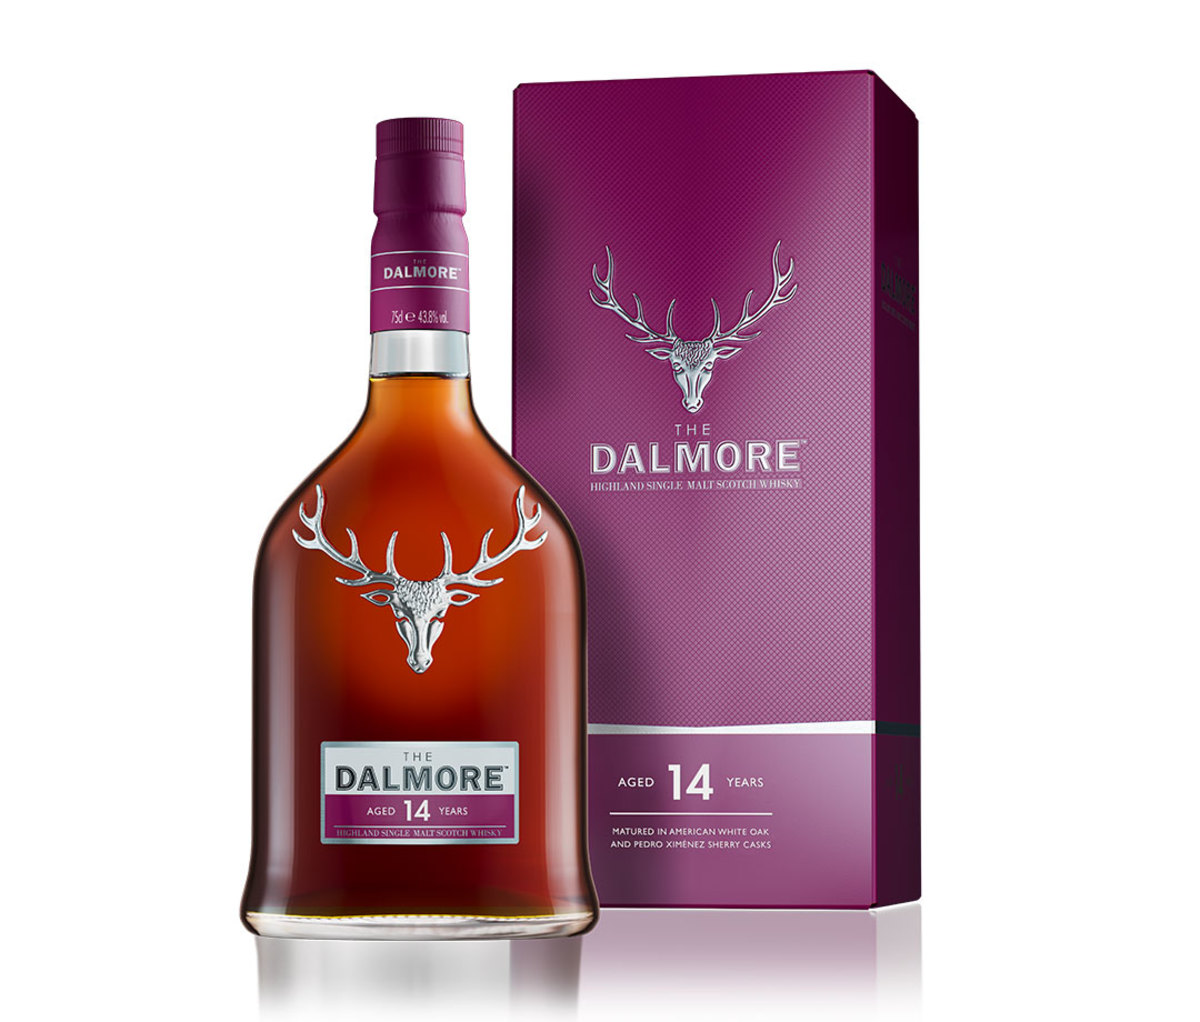 Bottle and box of The Dalmore 14